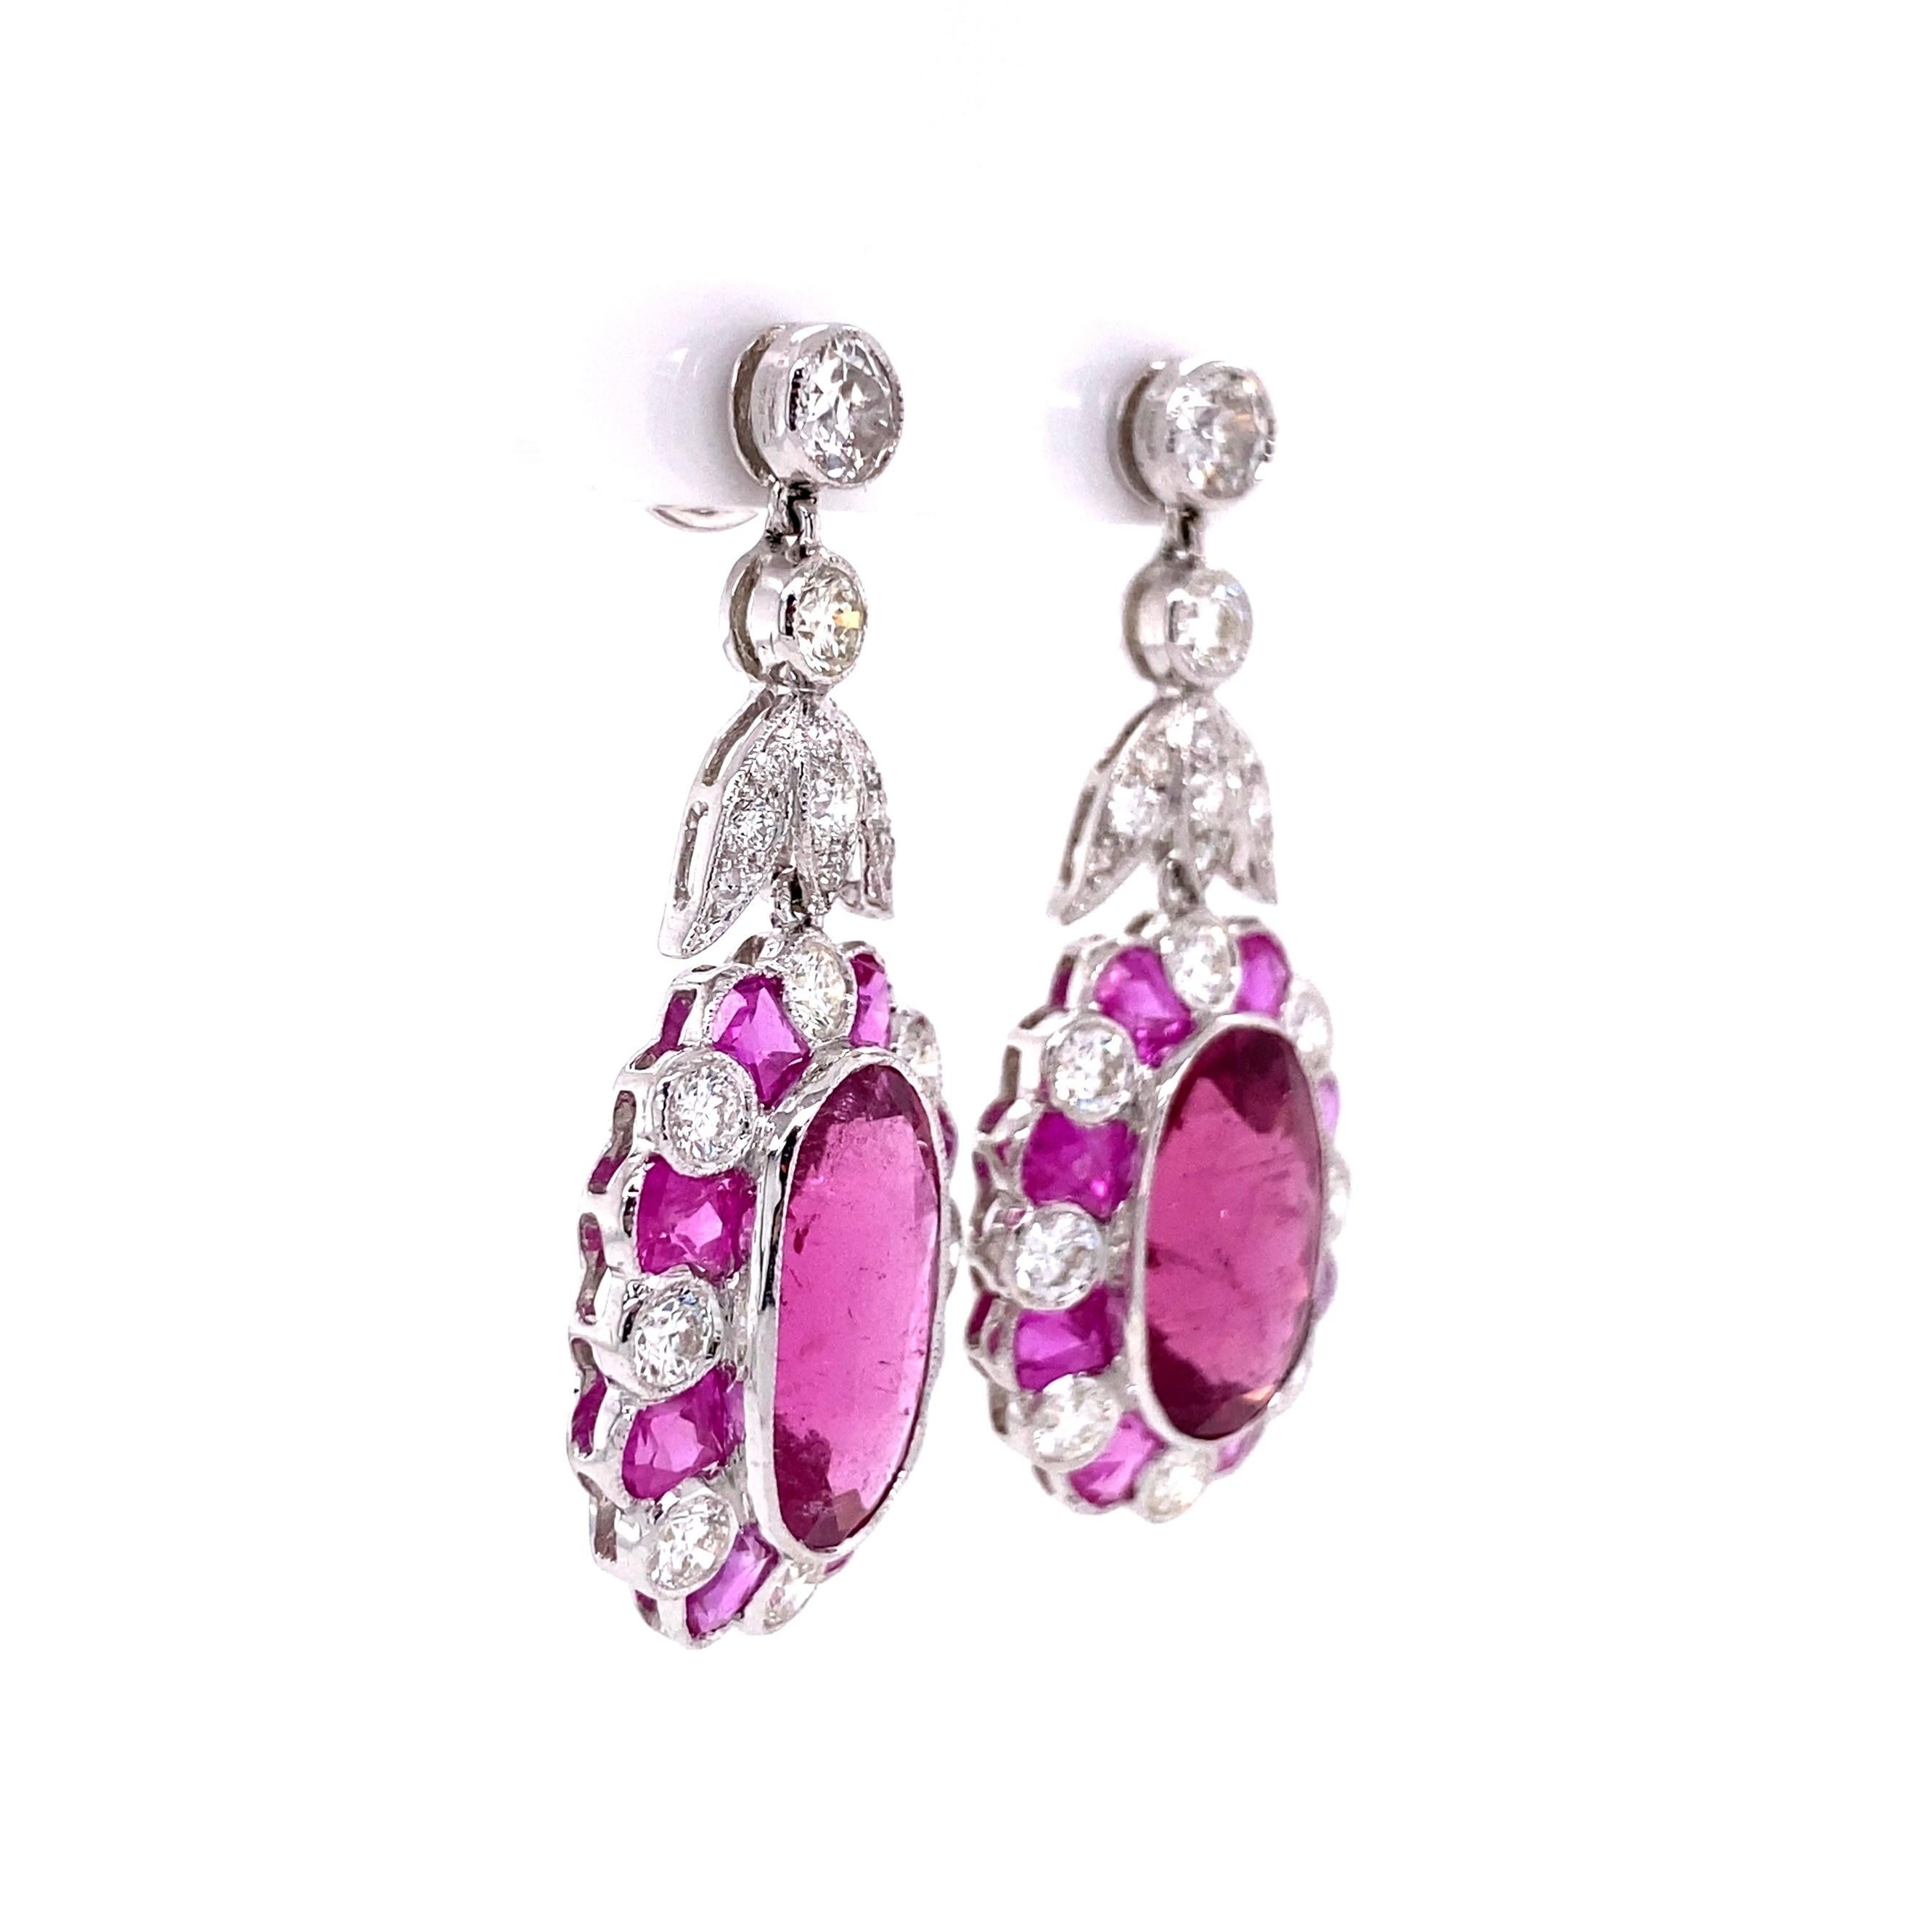 Beautiful and Finely detailed Cluster Dangle Earrings Hand set with two large oval Rubelite Tourmaline Gemstones, approx. 12.50tcw, 16 custom cut Natural Pink Sapphires, approx. 3.20tcw and 38 Old-cut Diamonds, approx. 3.00tcw. Post and butterfly